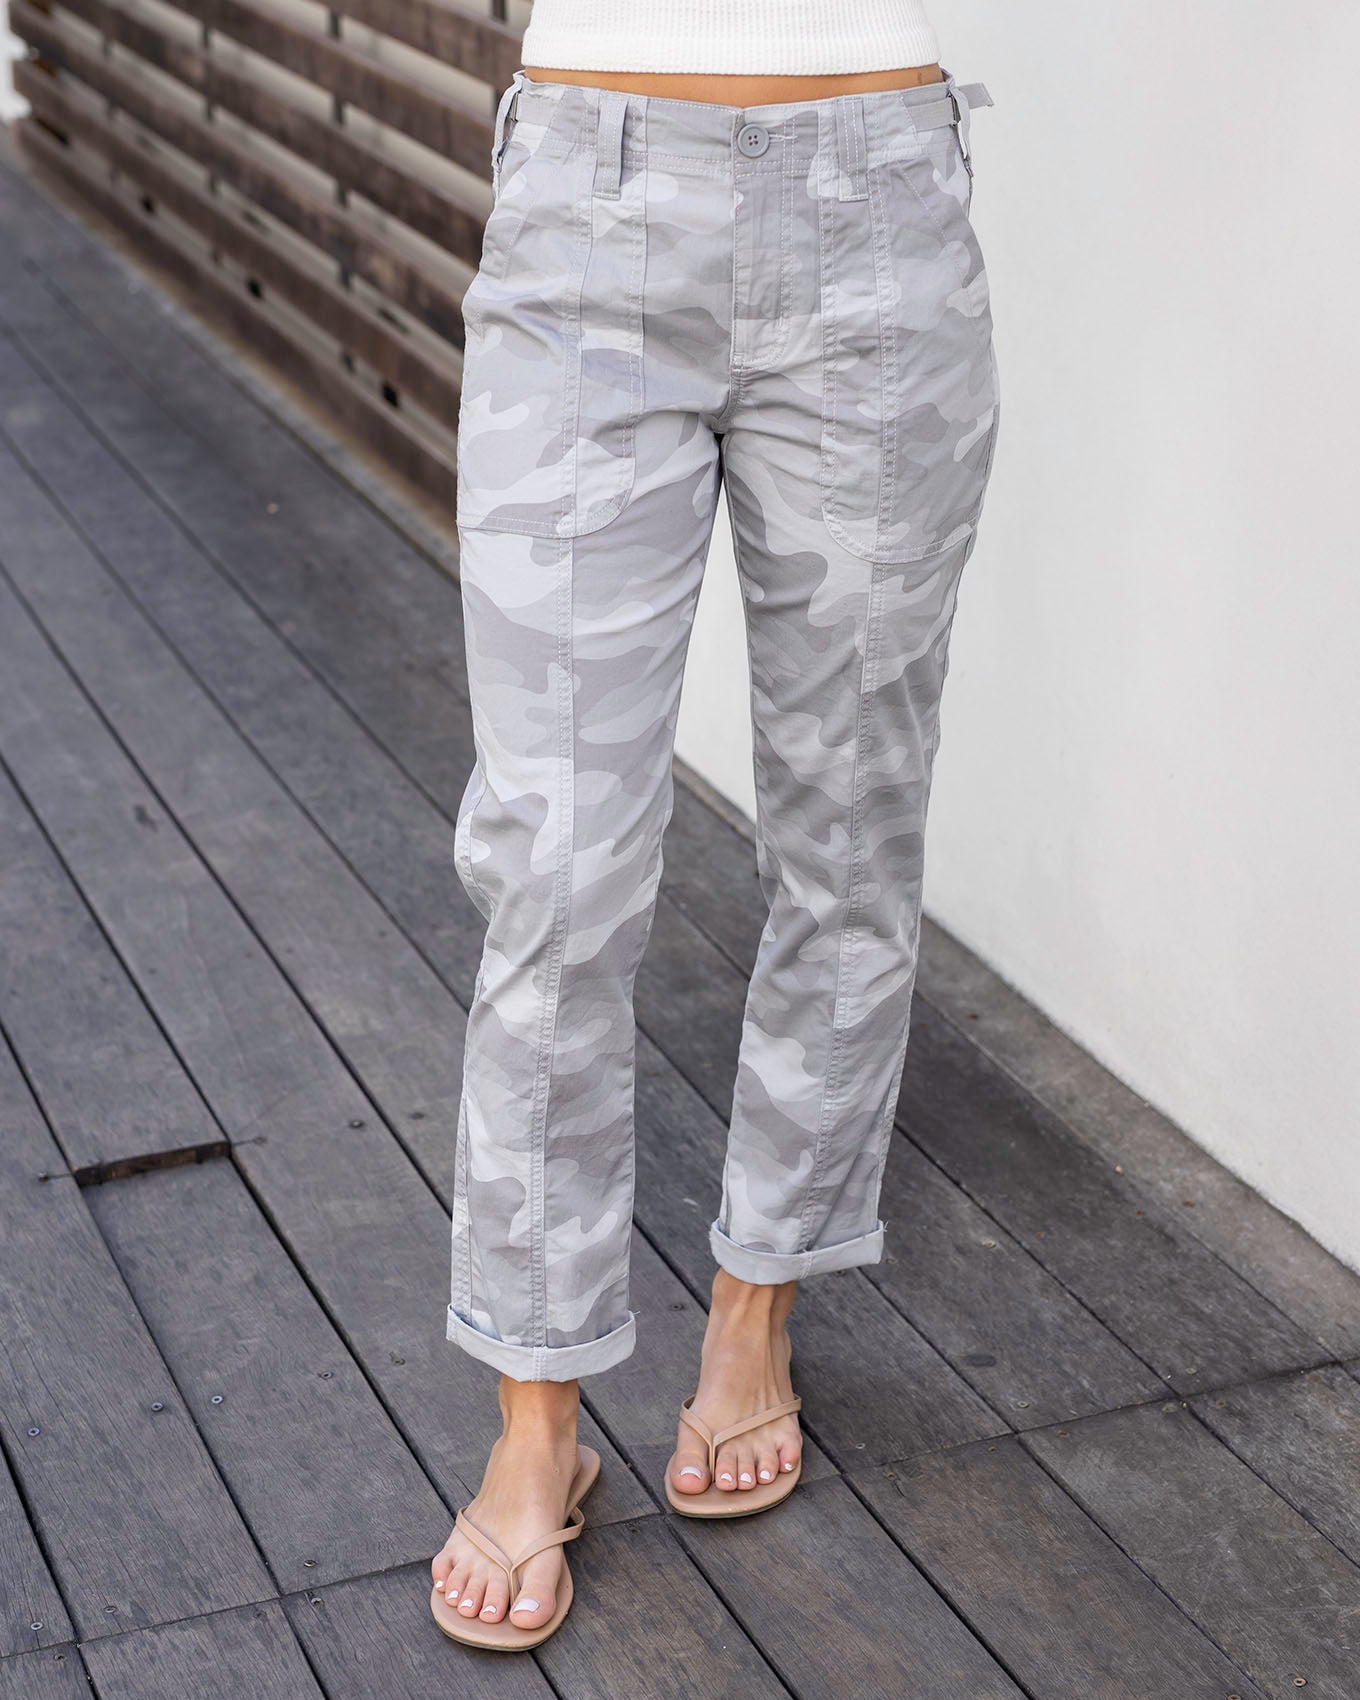 Comfy Luxe Camo Print Lightweight Lounge Pants - Size L/XL: US